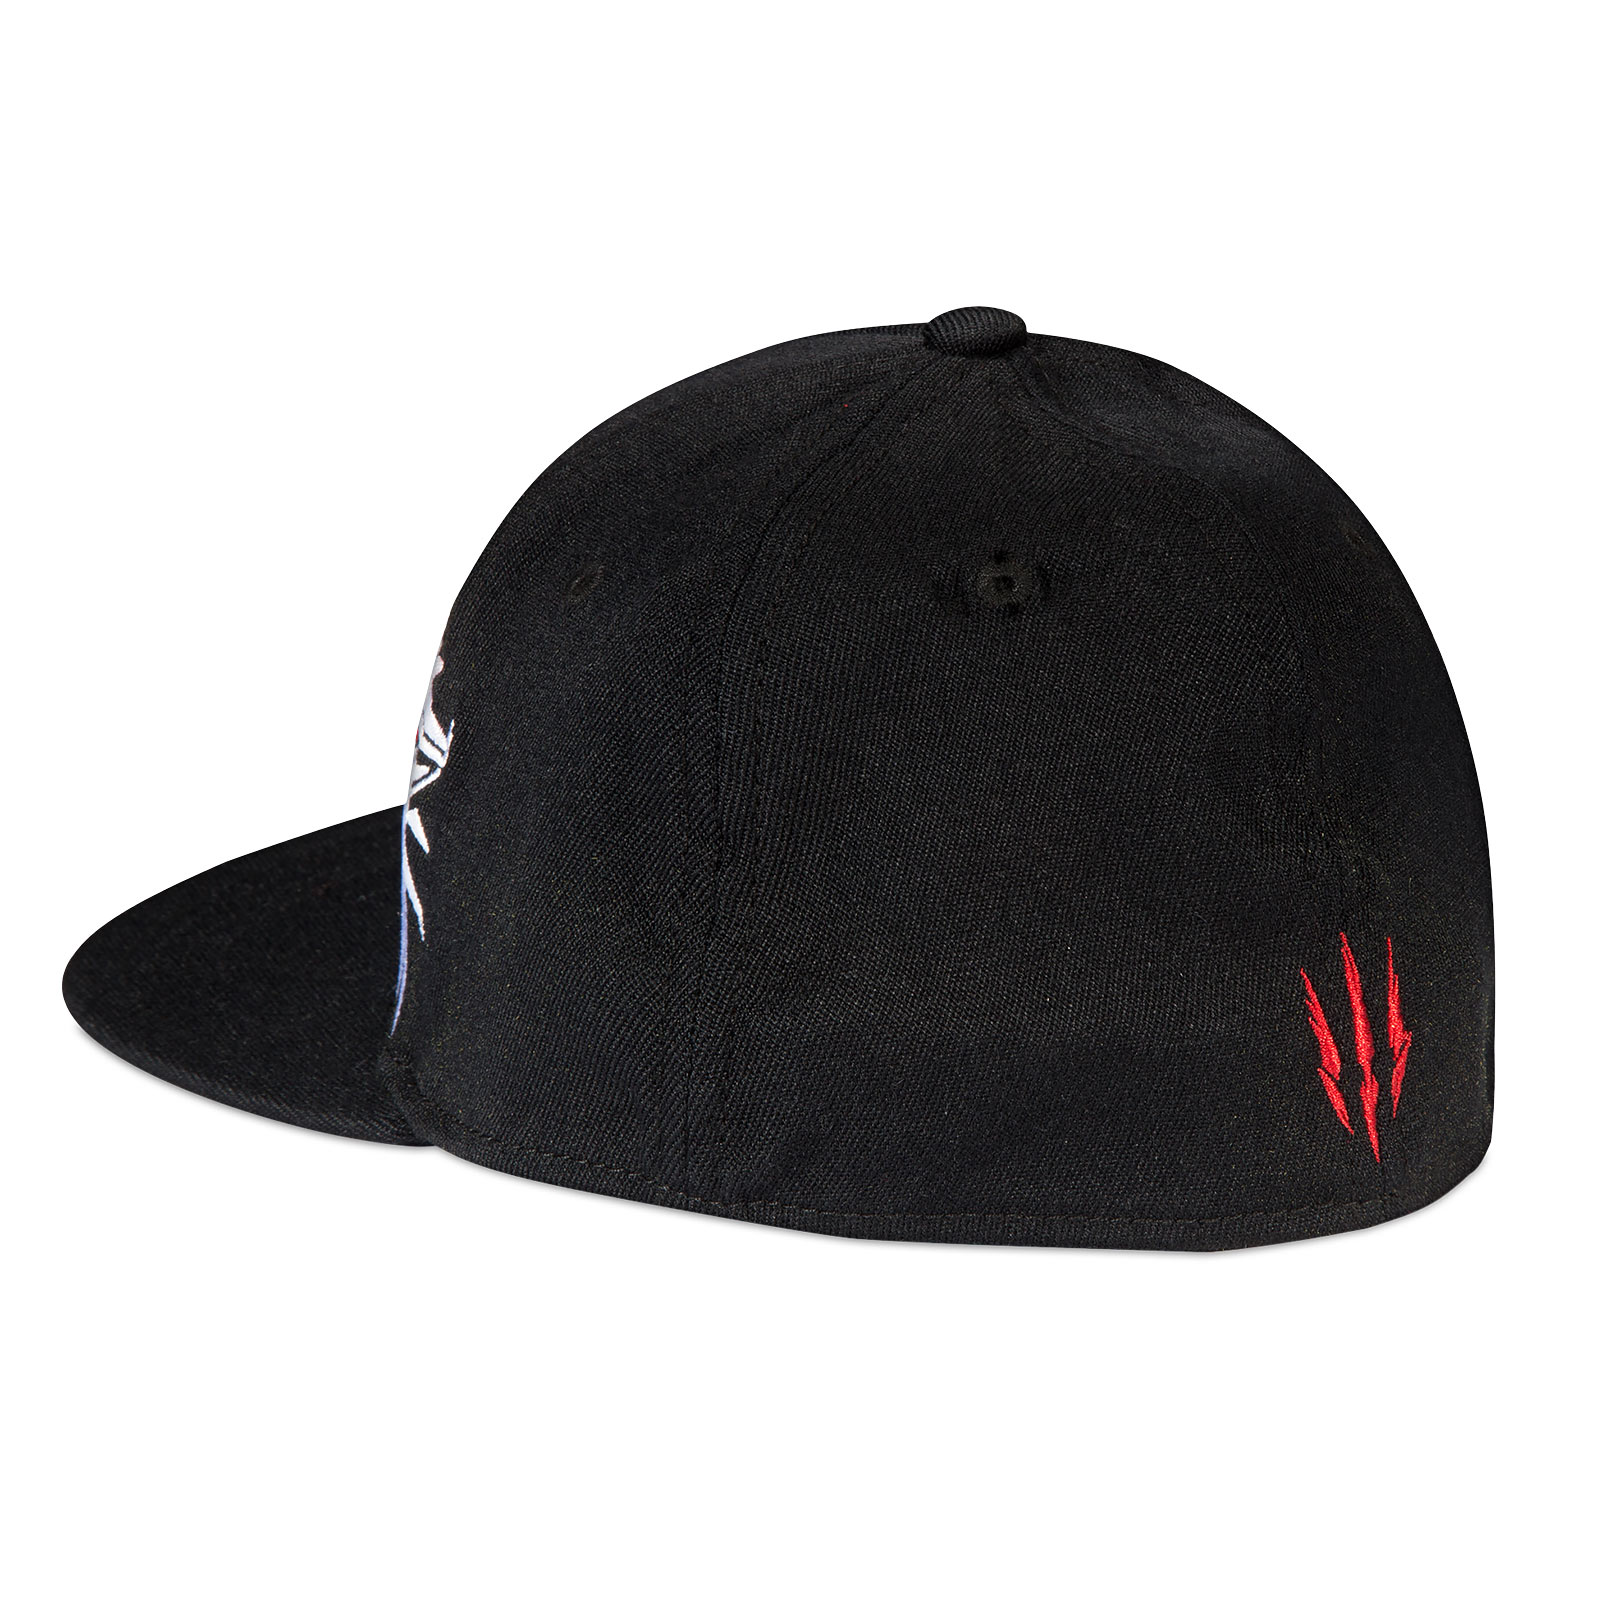 Witcher - Monsters Stretch Fit Cap